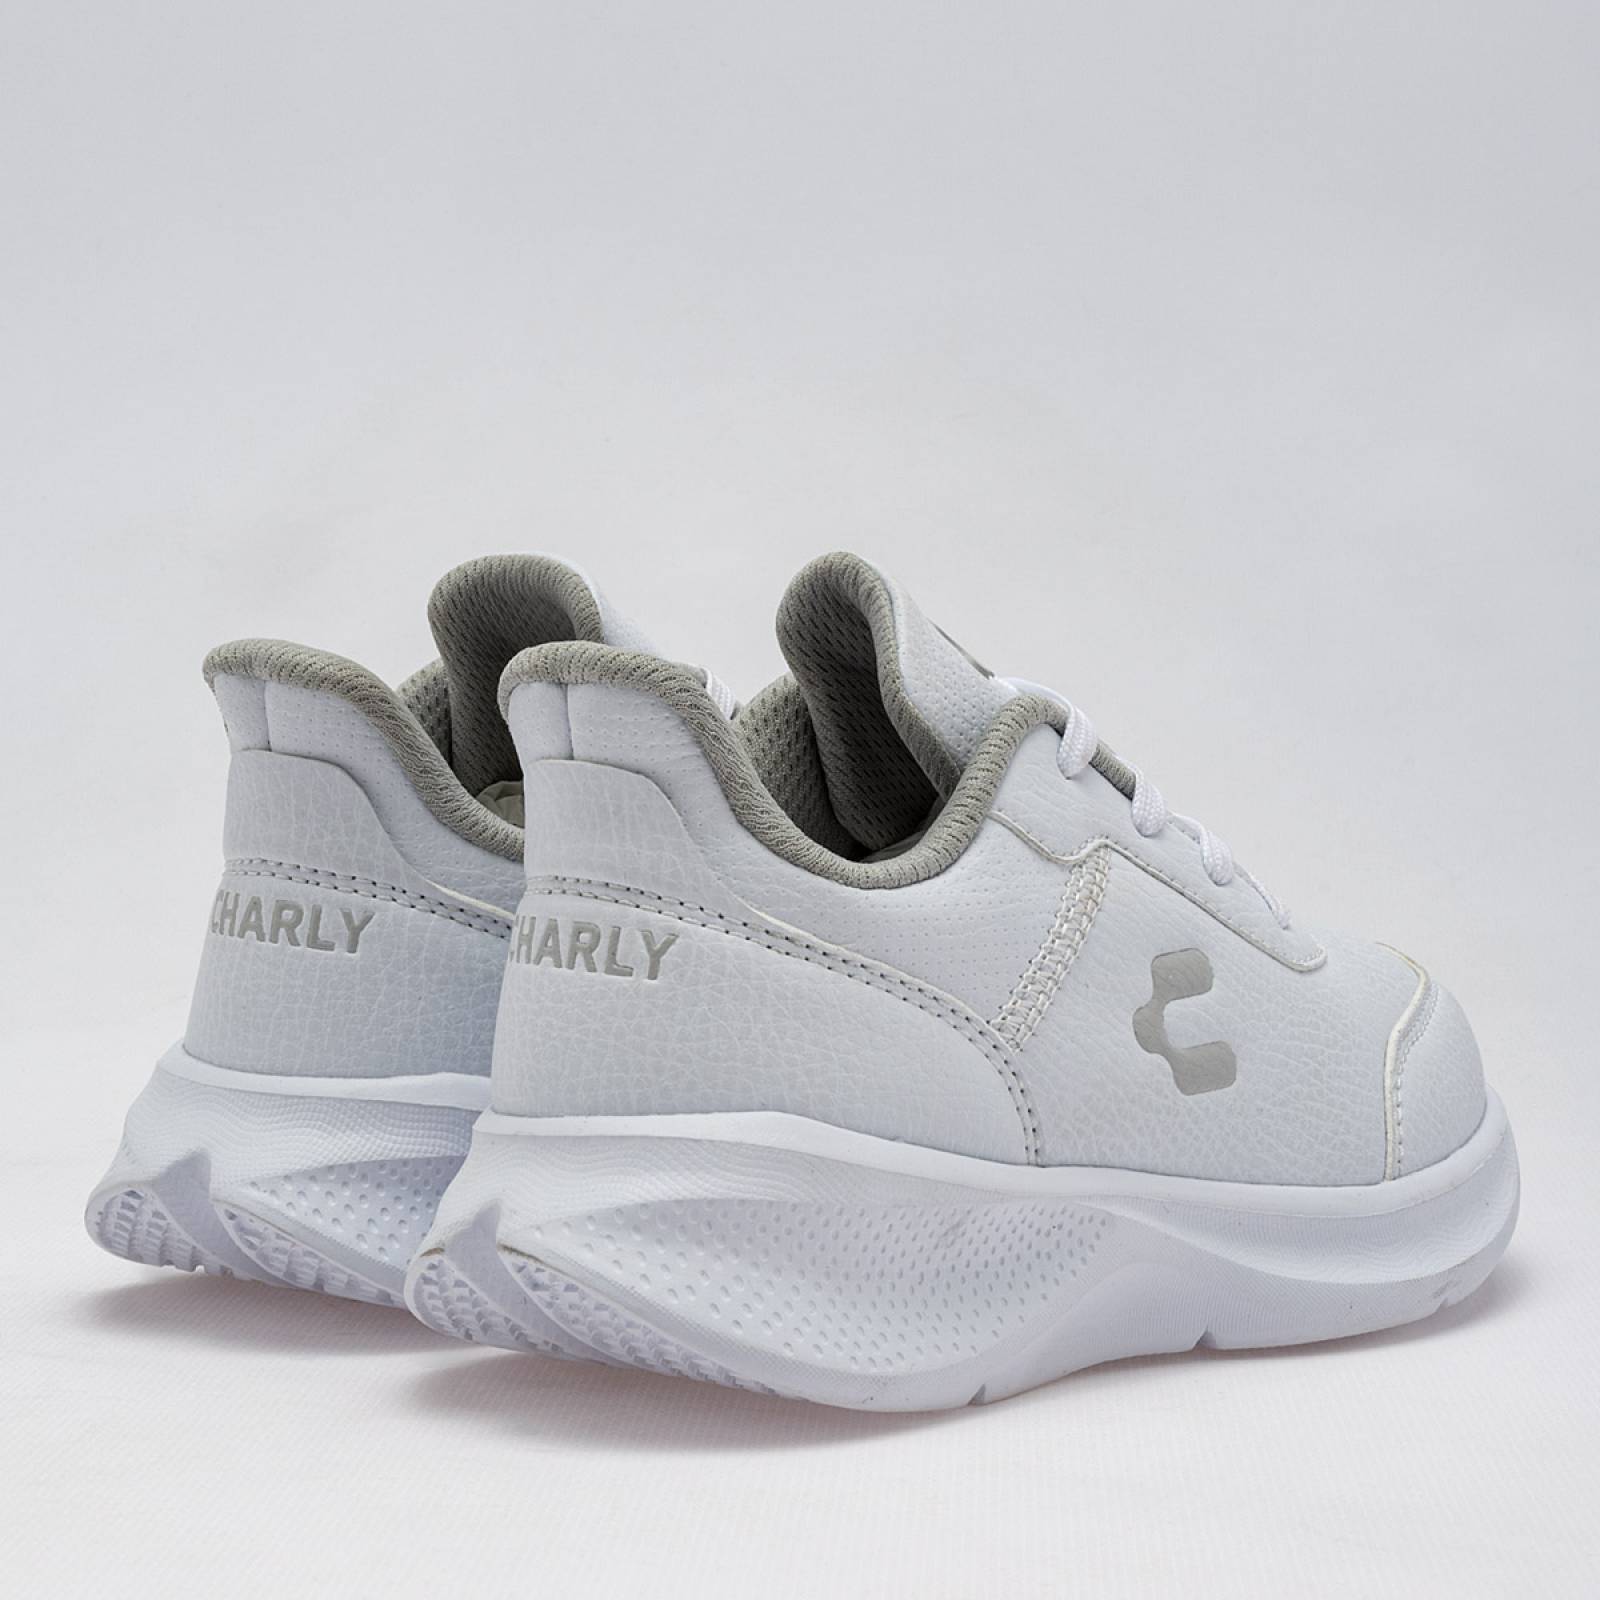 Charly Tenis Casual Blanco Similpiel Blanco Mujer 82012